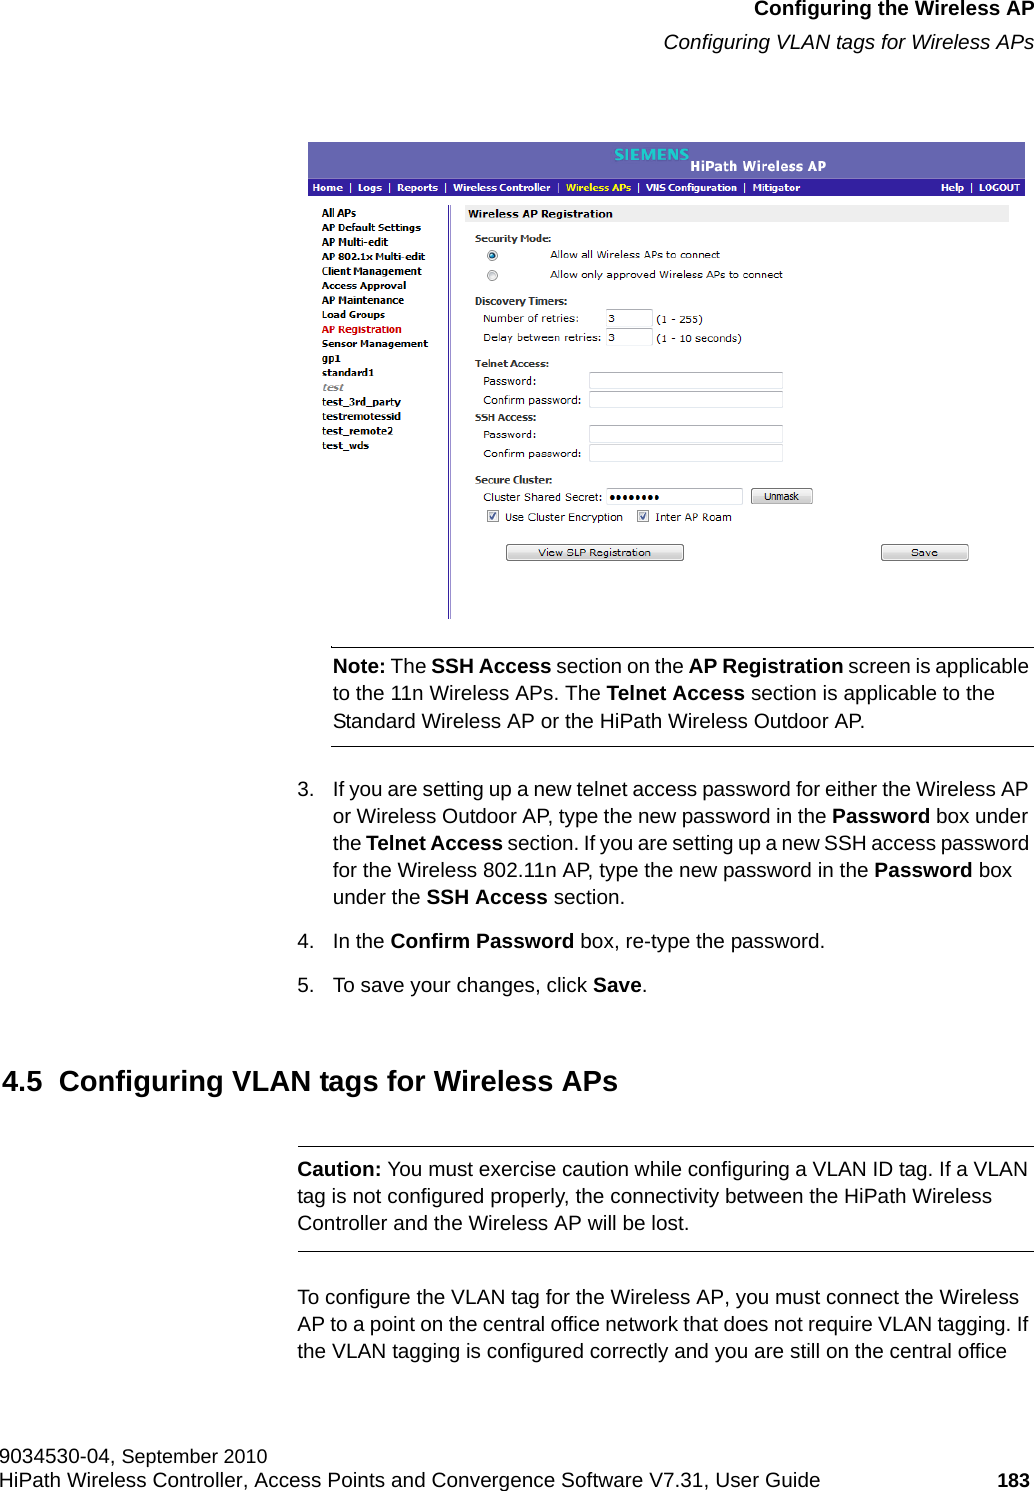 hwc_apstartup.fmConfiguring the Wireless APConfiguring VLAN tags for Wireless APs9034530-04, September 2010HiPath Wireless Controller, Access Points and Convergence Software V7.31, User Guide 183         Note: The SSH Access section on the AP Registration screen is applicable to the 11n Wireless APs. The Telnet Access section is applicable to the Standard Wireless AP or the HiPath Wireless Outdoor AP.3. If you are setting up a new telnet access password for either the Wireless AP or Wireless Outdoor AP, type the new password in the Password box under the Telnet Access section. If you are setting up a new SSH access password for the Wireless 802.11n AP, type the new password in the Password box under the SSH Access section.4. In the Confirm Password box, re-type the password.5. To save your changes, click Save.4.5  Configuring VLAN tags for Wireless APsCaution: You must exercise caution while configuring a VLAN ID tag. If a VLAN tag is not configured properly, the connectivity between the HiPath Wireless Controller and the Wireless AP will be lost.To configure the VLAN tag for the Wireless AP, you must connect the Wireless AP to a point on the central office network that does not require VLAN tagging. If the VLAN tagging is configured correctly and you are still on the central office 